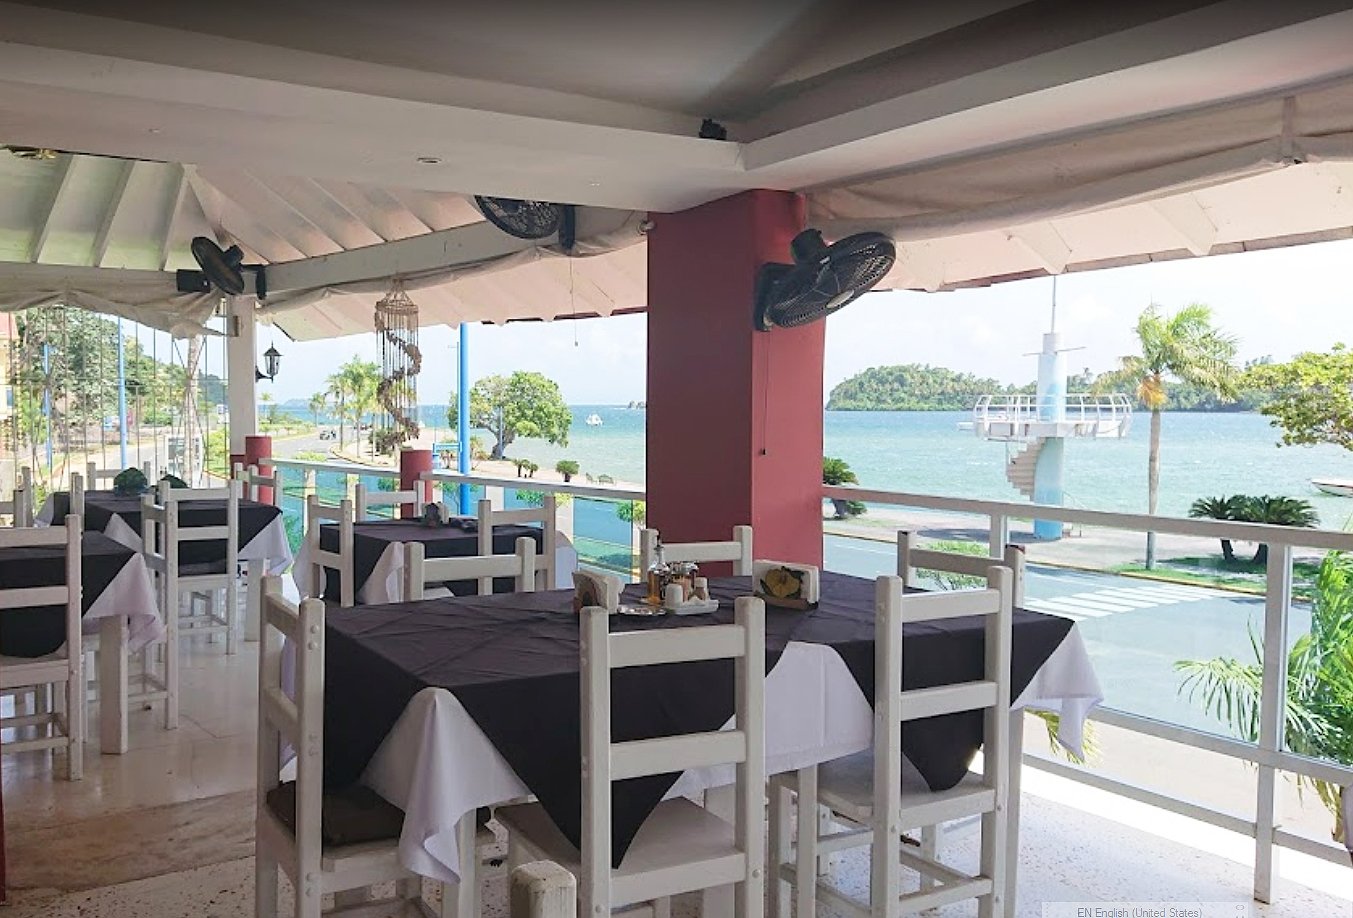 Taberna Bar Restaurant in Samana - Tapas and Wines - Spanish Style Restaurant, Overlooking the Malecon and Marina of the Town of Samana.